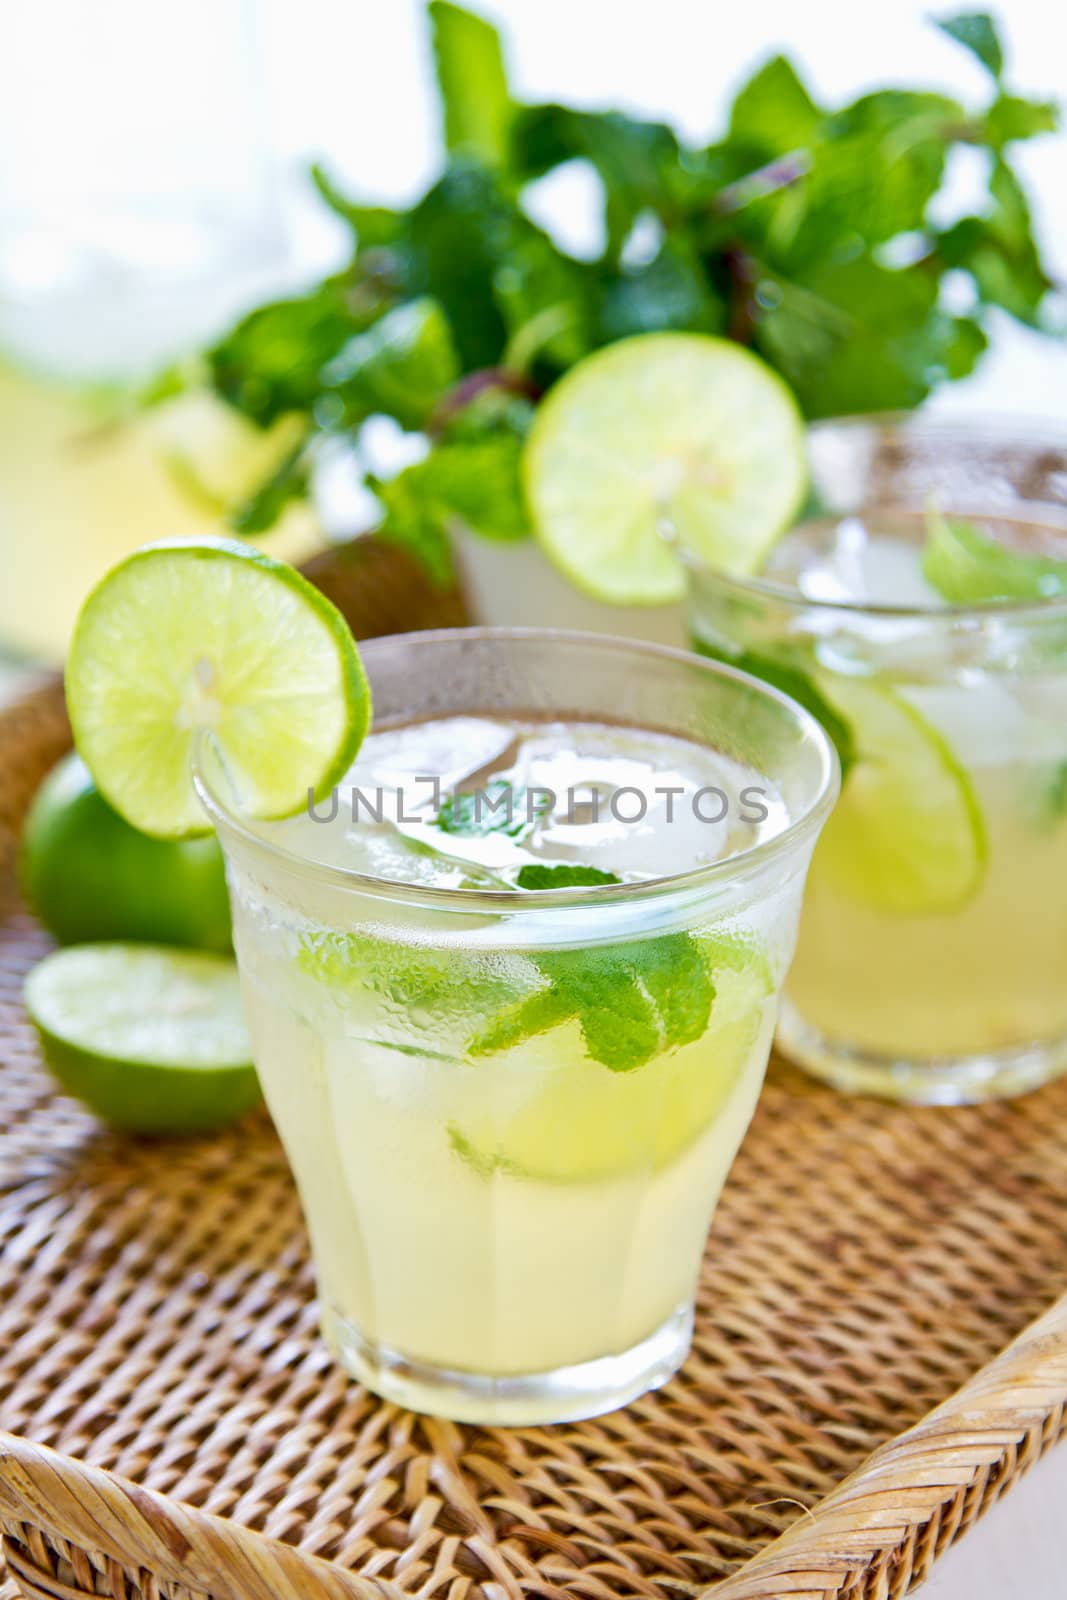 Lime juice by vanillaechoes